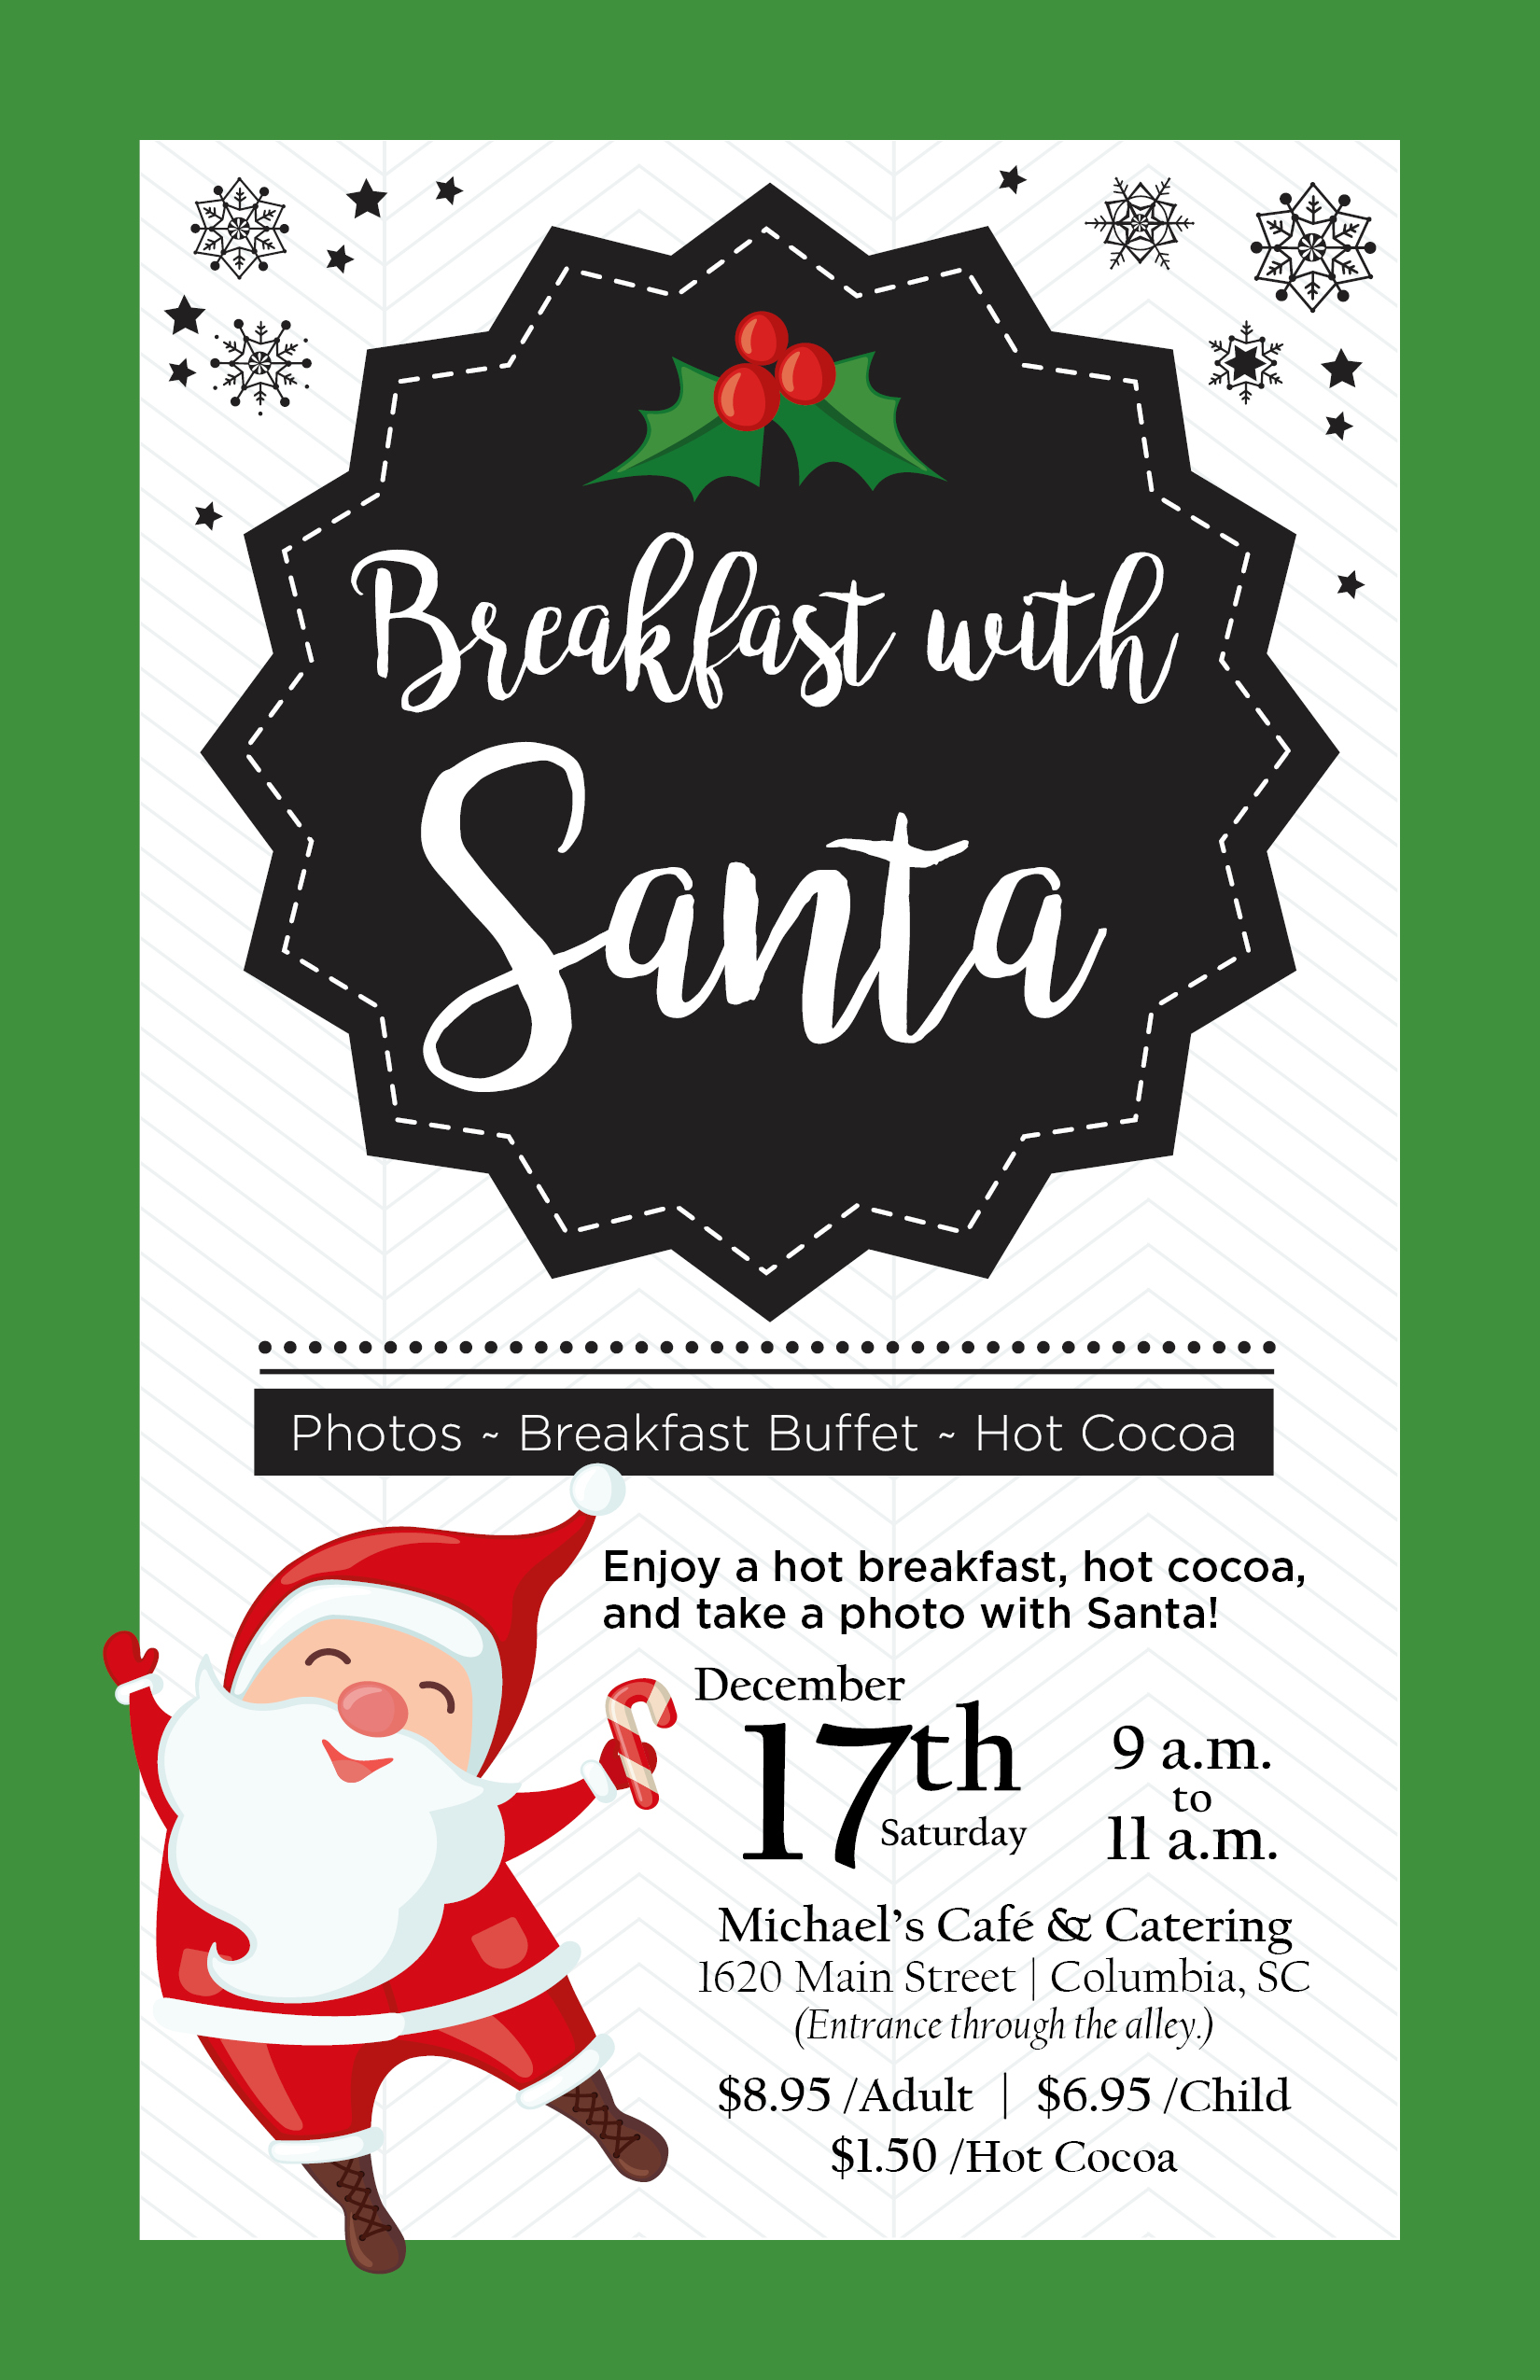 flier-michaels-cafe-and-catering-breakfast-with-santa